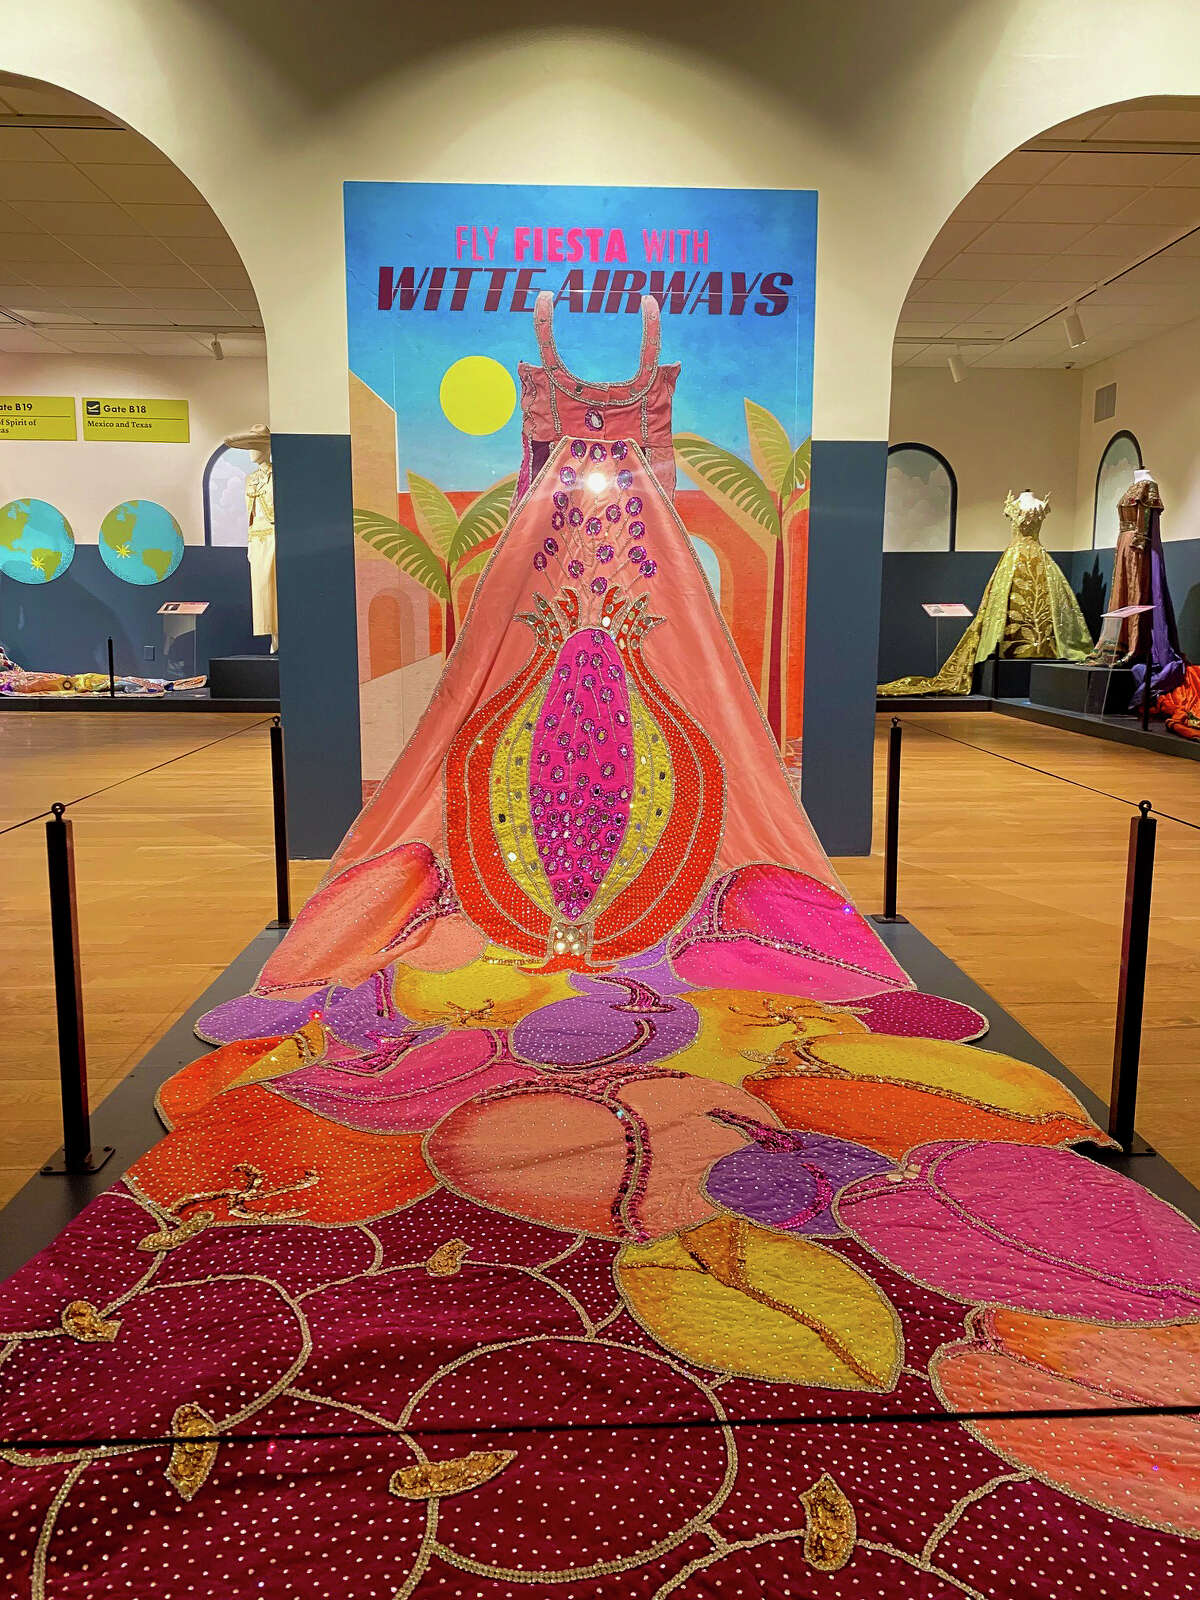 Fiesta San Antonio coronation gowns find a home at the Witte Museum